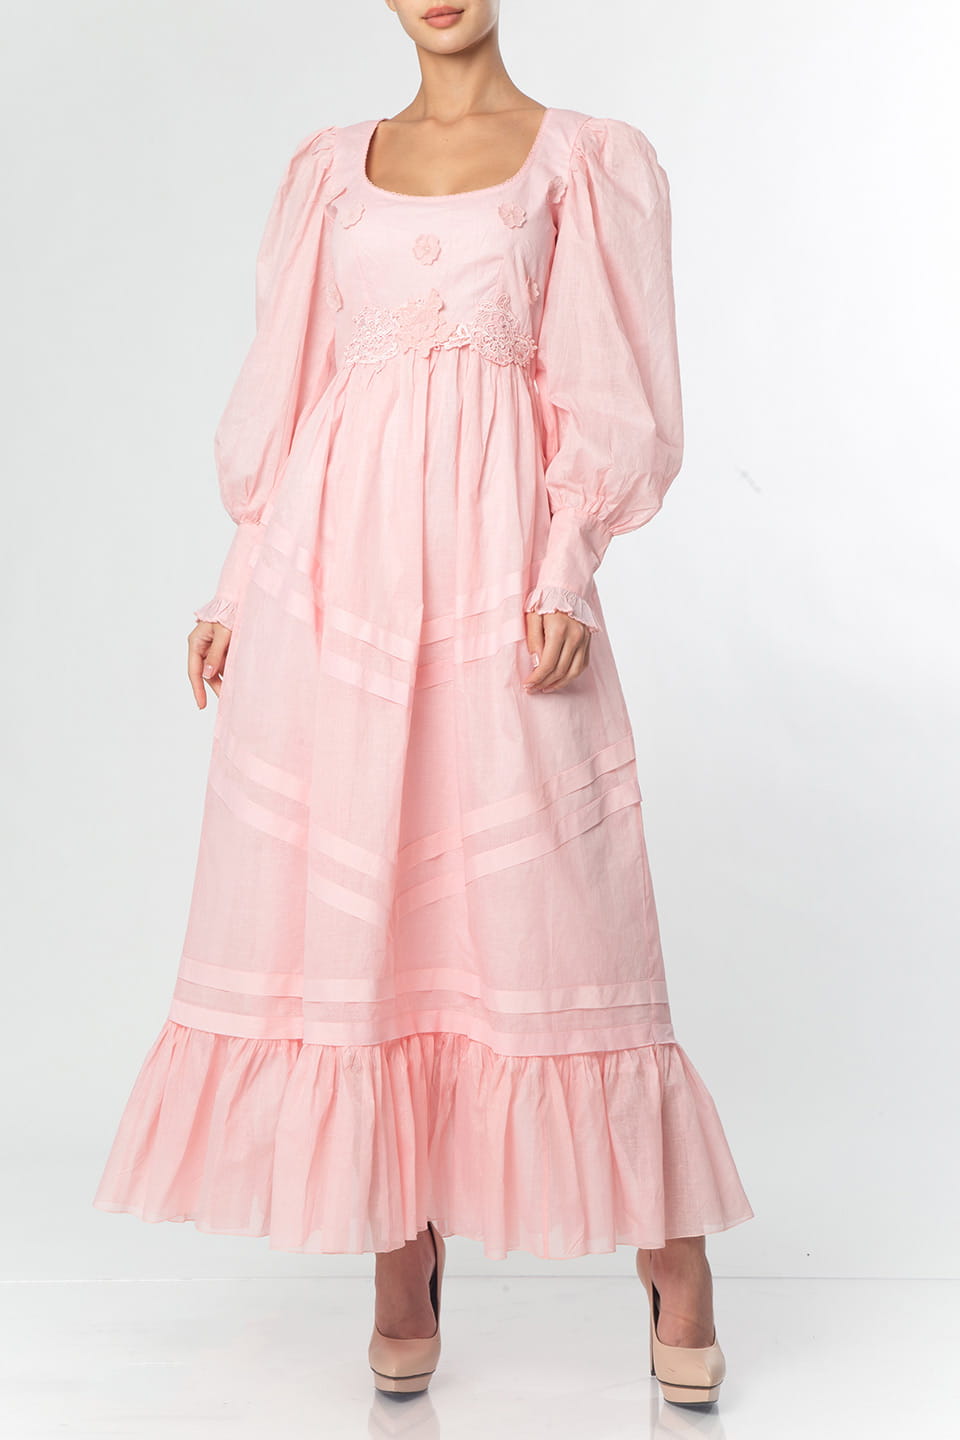 Thumbnail for Product gallery 1, Manoush religeuse long dress pink front